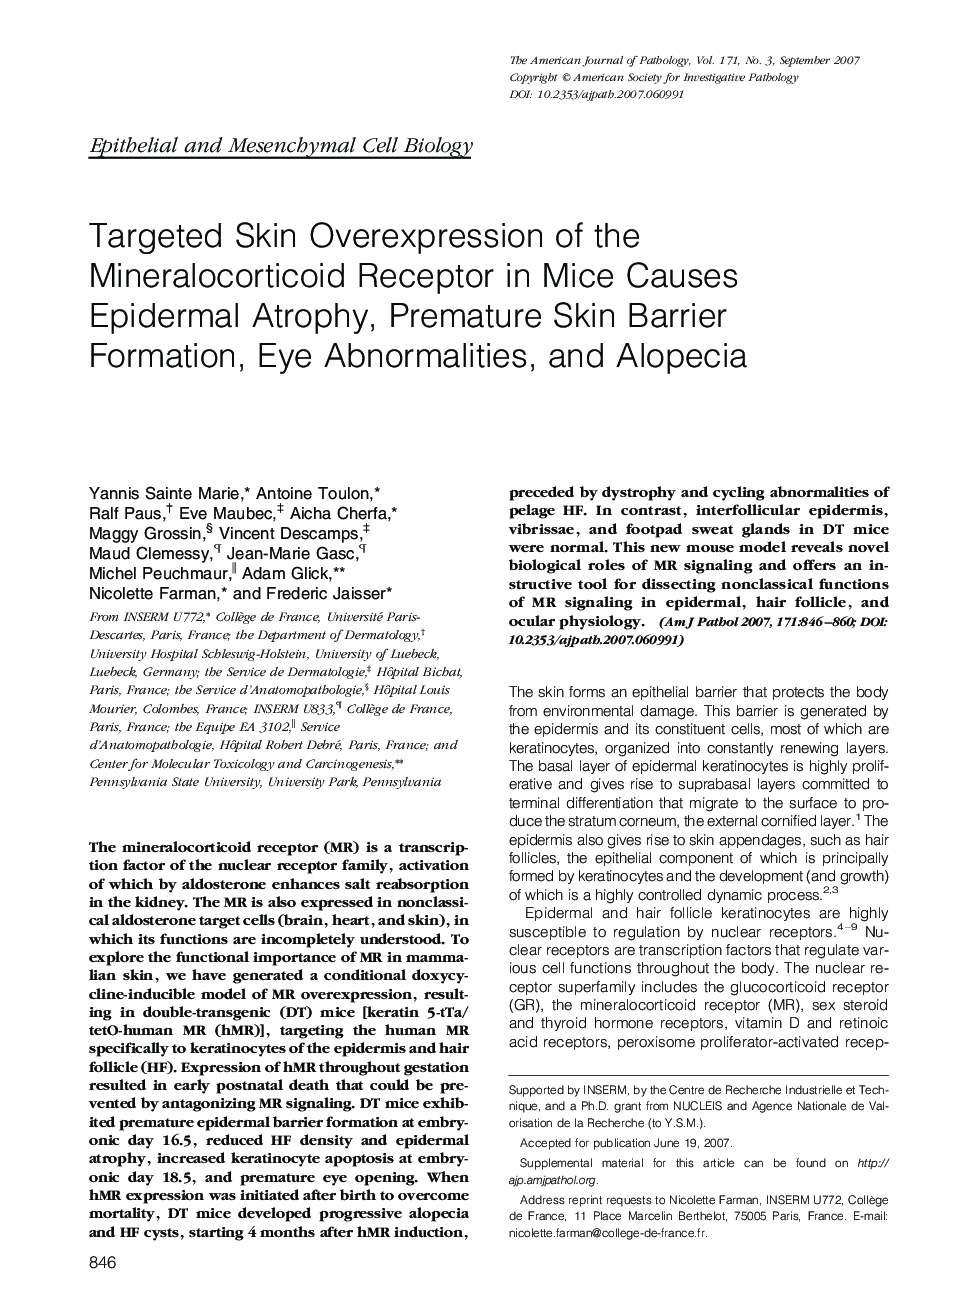 Regular ArticlesTargeted Skin Overexpression of the Mineralocorticoid Receptor in Mice Causes Epidermal Atrophy, Premature Skin Barrier Formation, Eye Abnormalities, and Alopecia